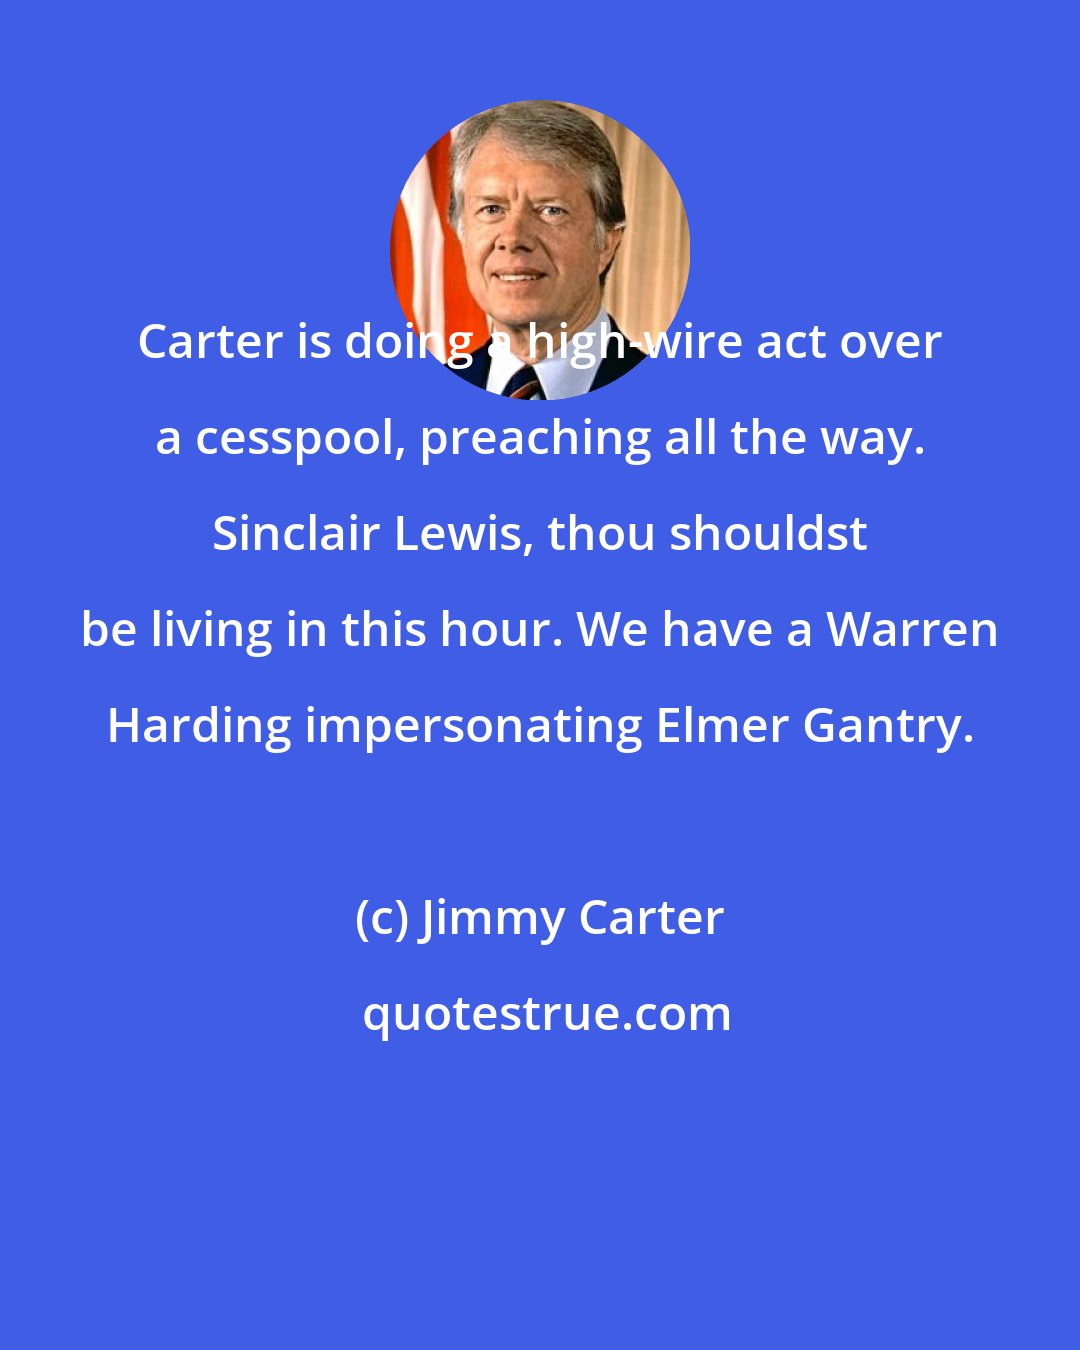 Jimmy Carter: Carter is doing a high-wire act over a cesspool, preaching all the way. Sinclair Lewis, thou shouldst be living in this hour. We have a Warren Harding impersonating Elmer Gantry.